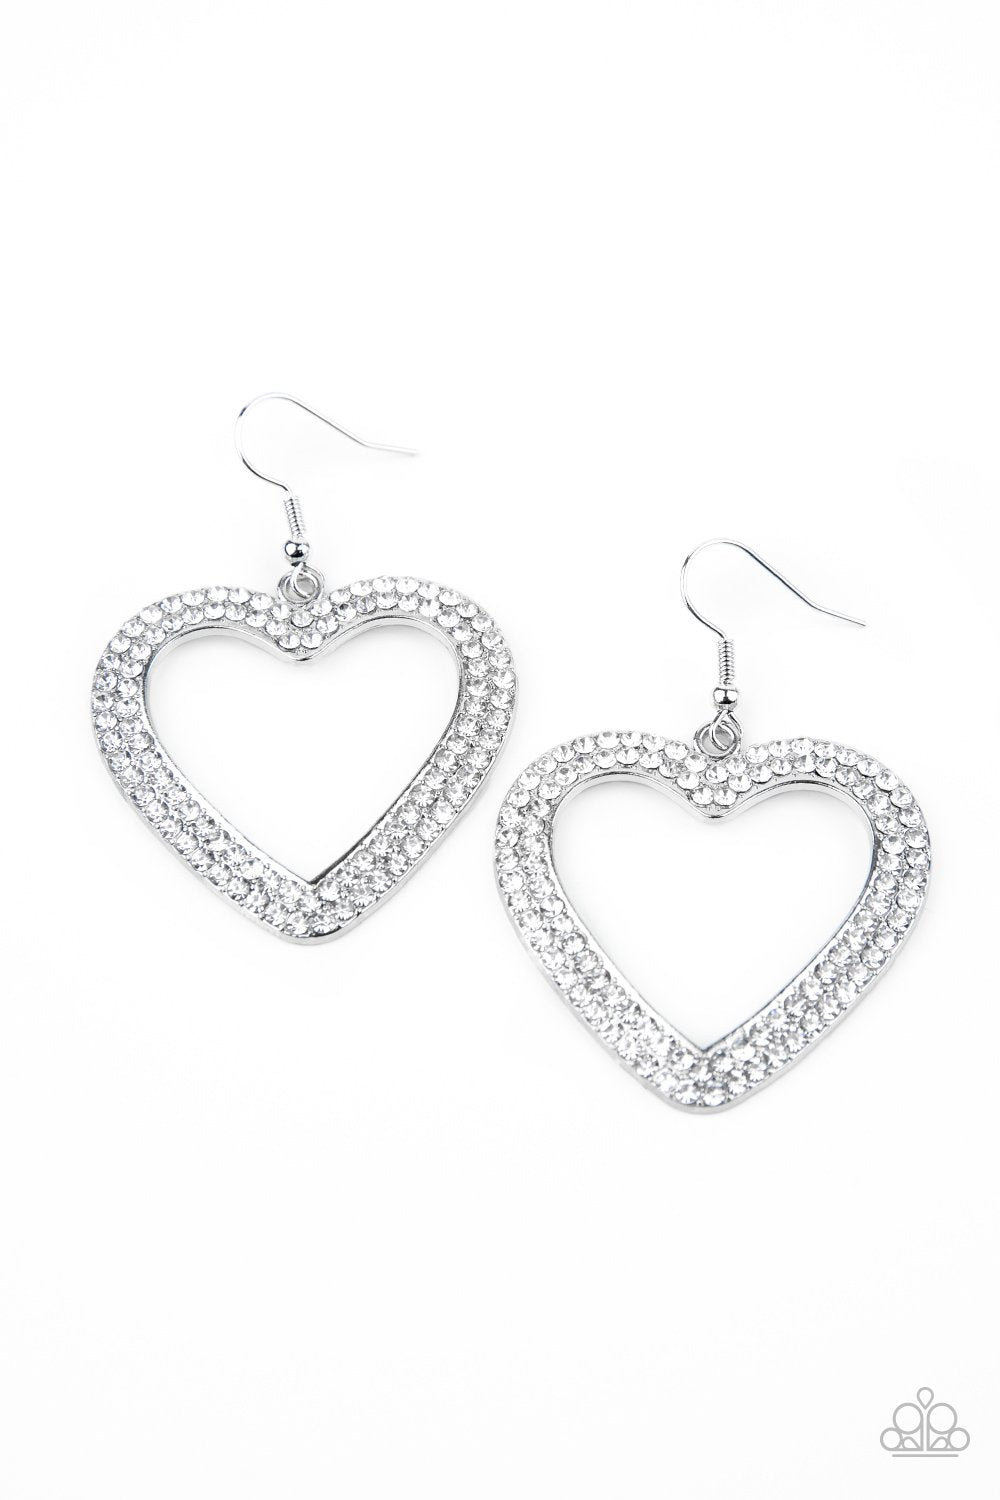 GLISTEN To Your Heart Silver and White Rhinestone Heart Earrings - Paparazzi Accessories - lightbox -CarasShop.com - $5 Jewelry by Cara Jewels